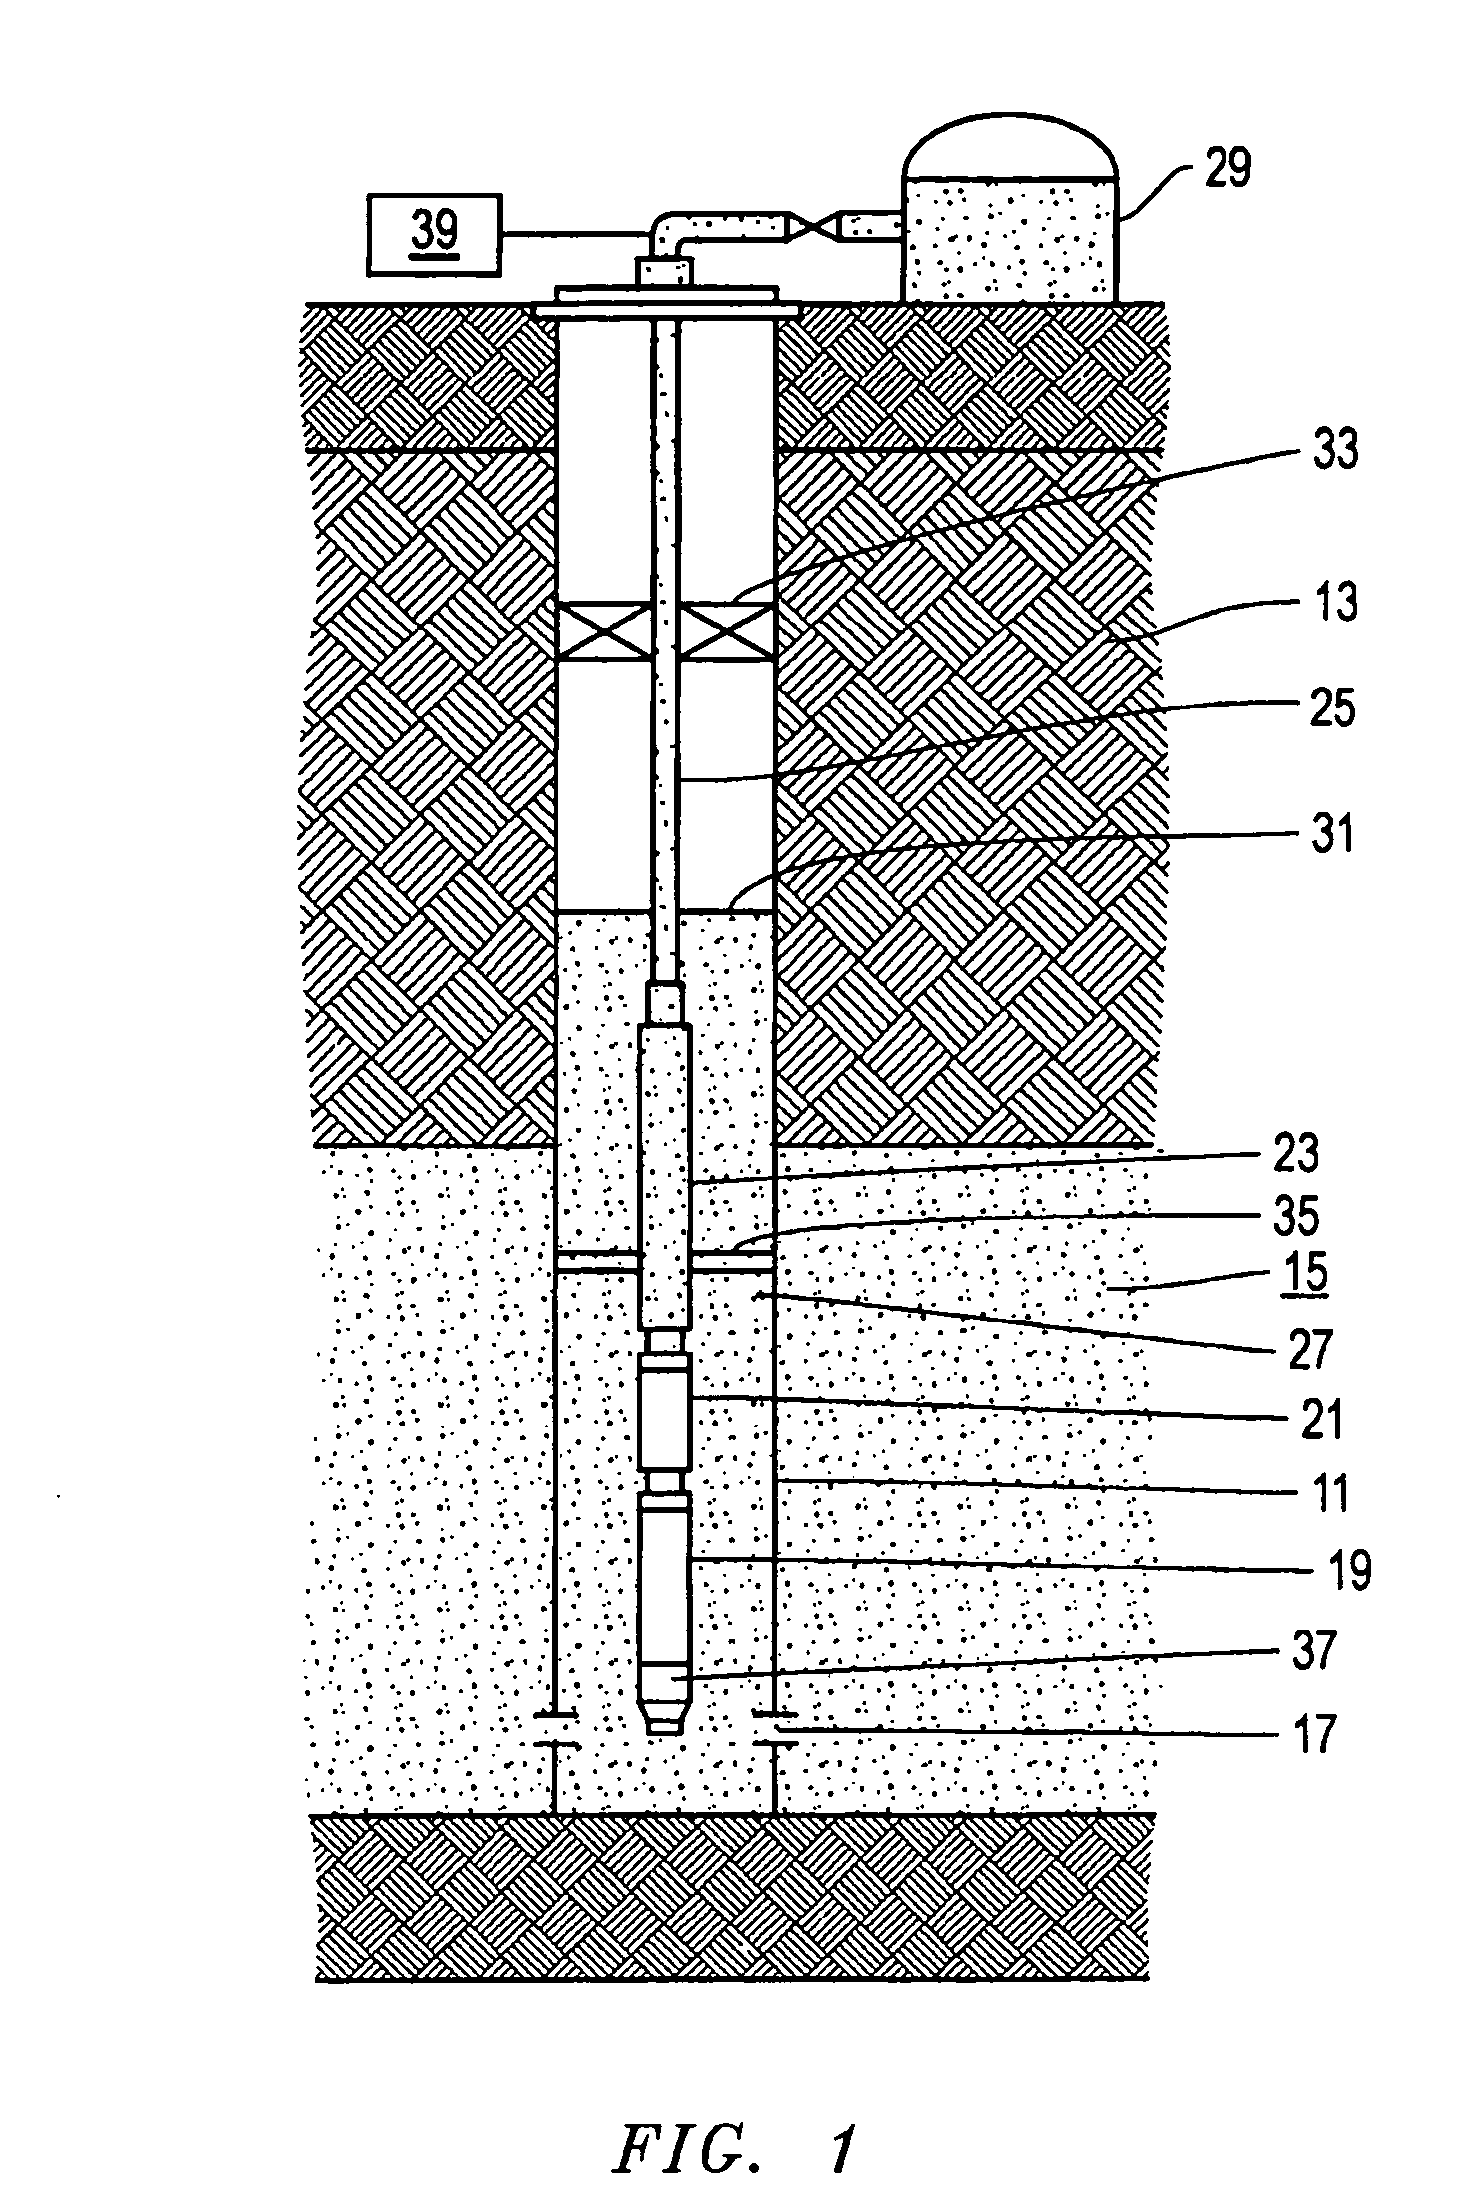 System, method, and apparatus for nodal vibration analysis of a device at different operational frequencies